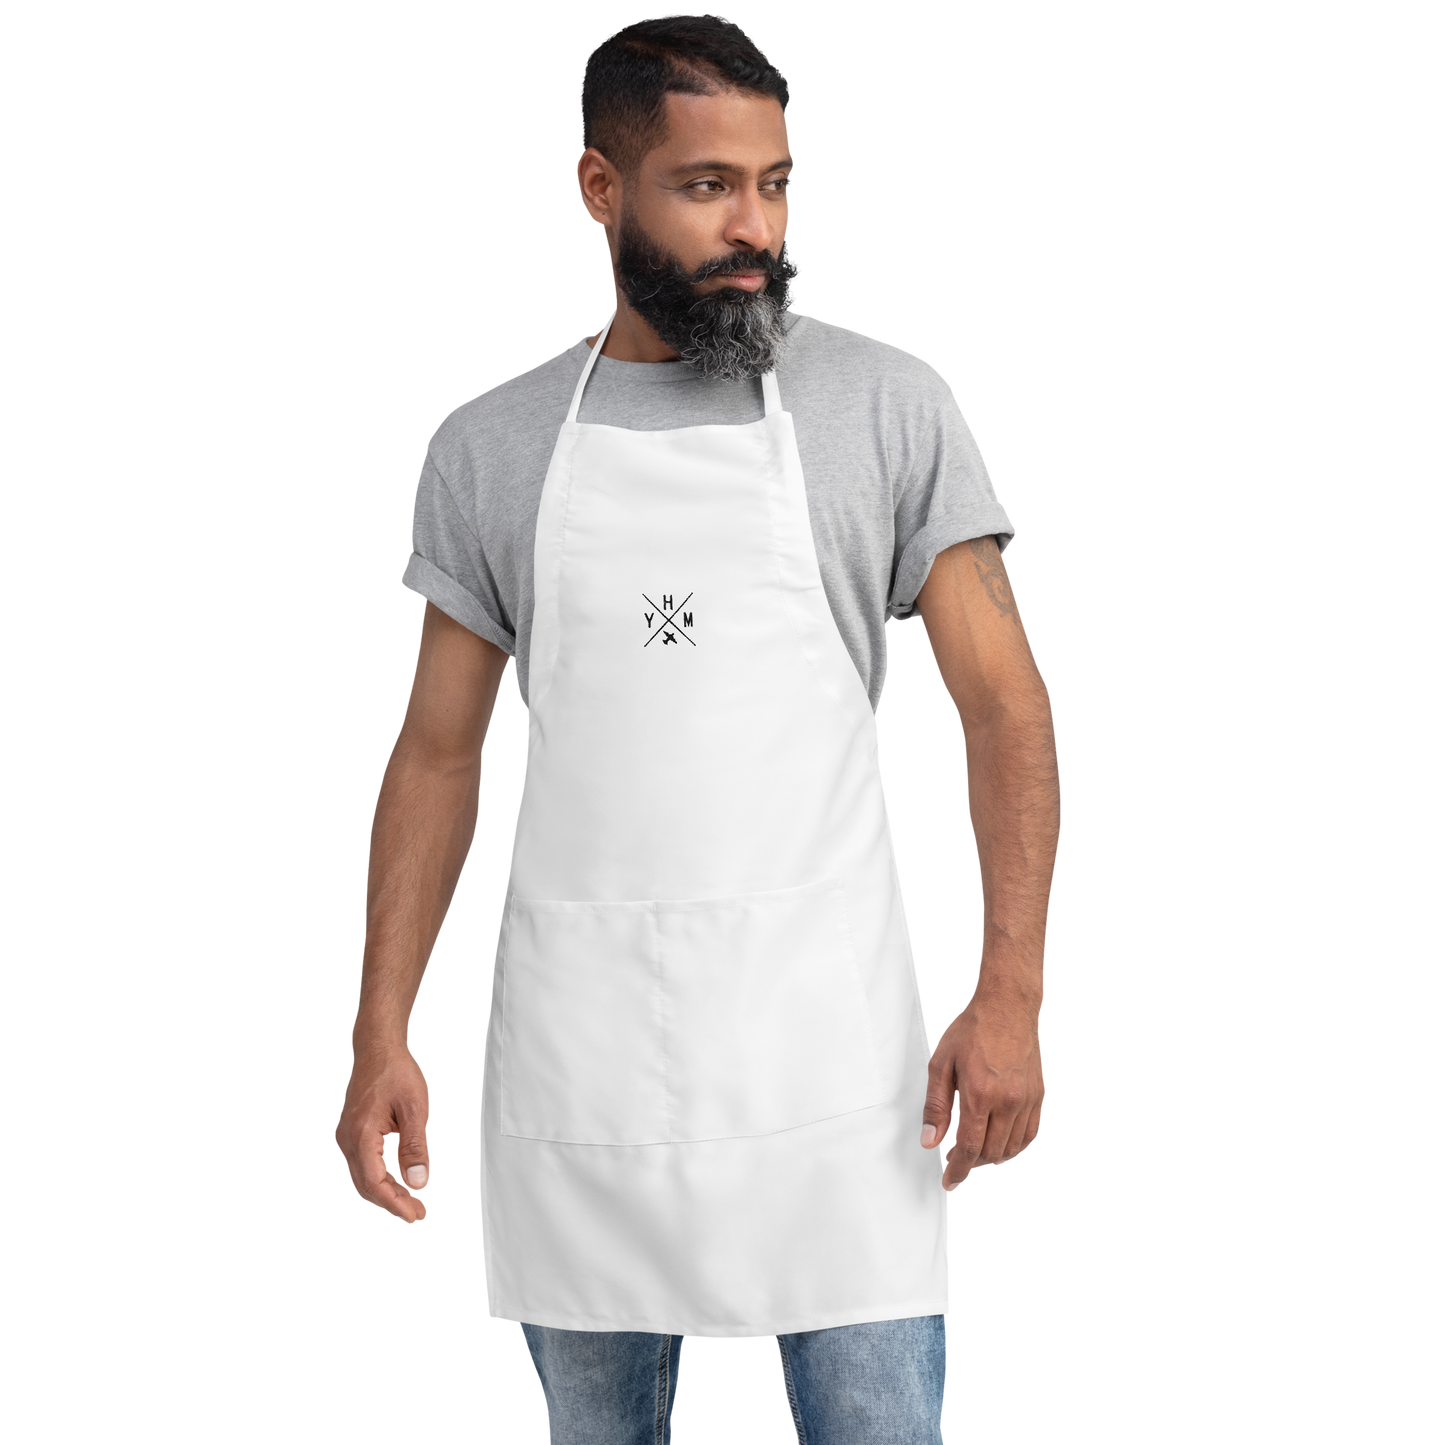 Crossed-X Embroidered Apron • Black Embroidery